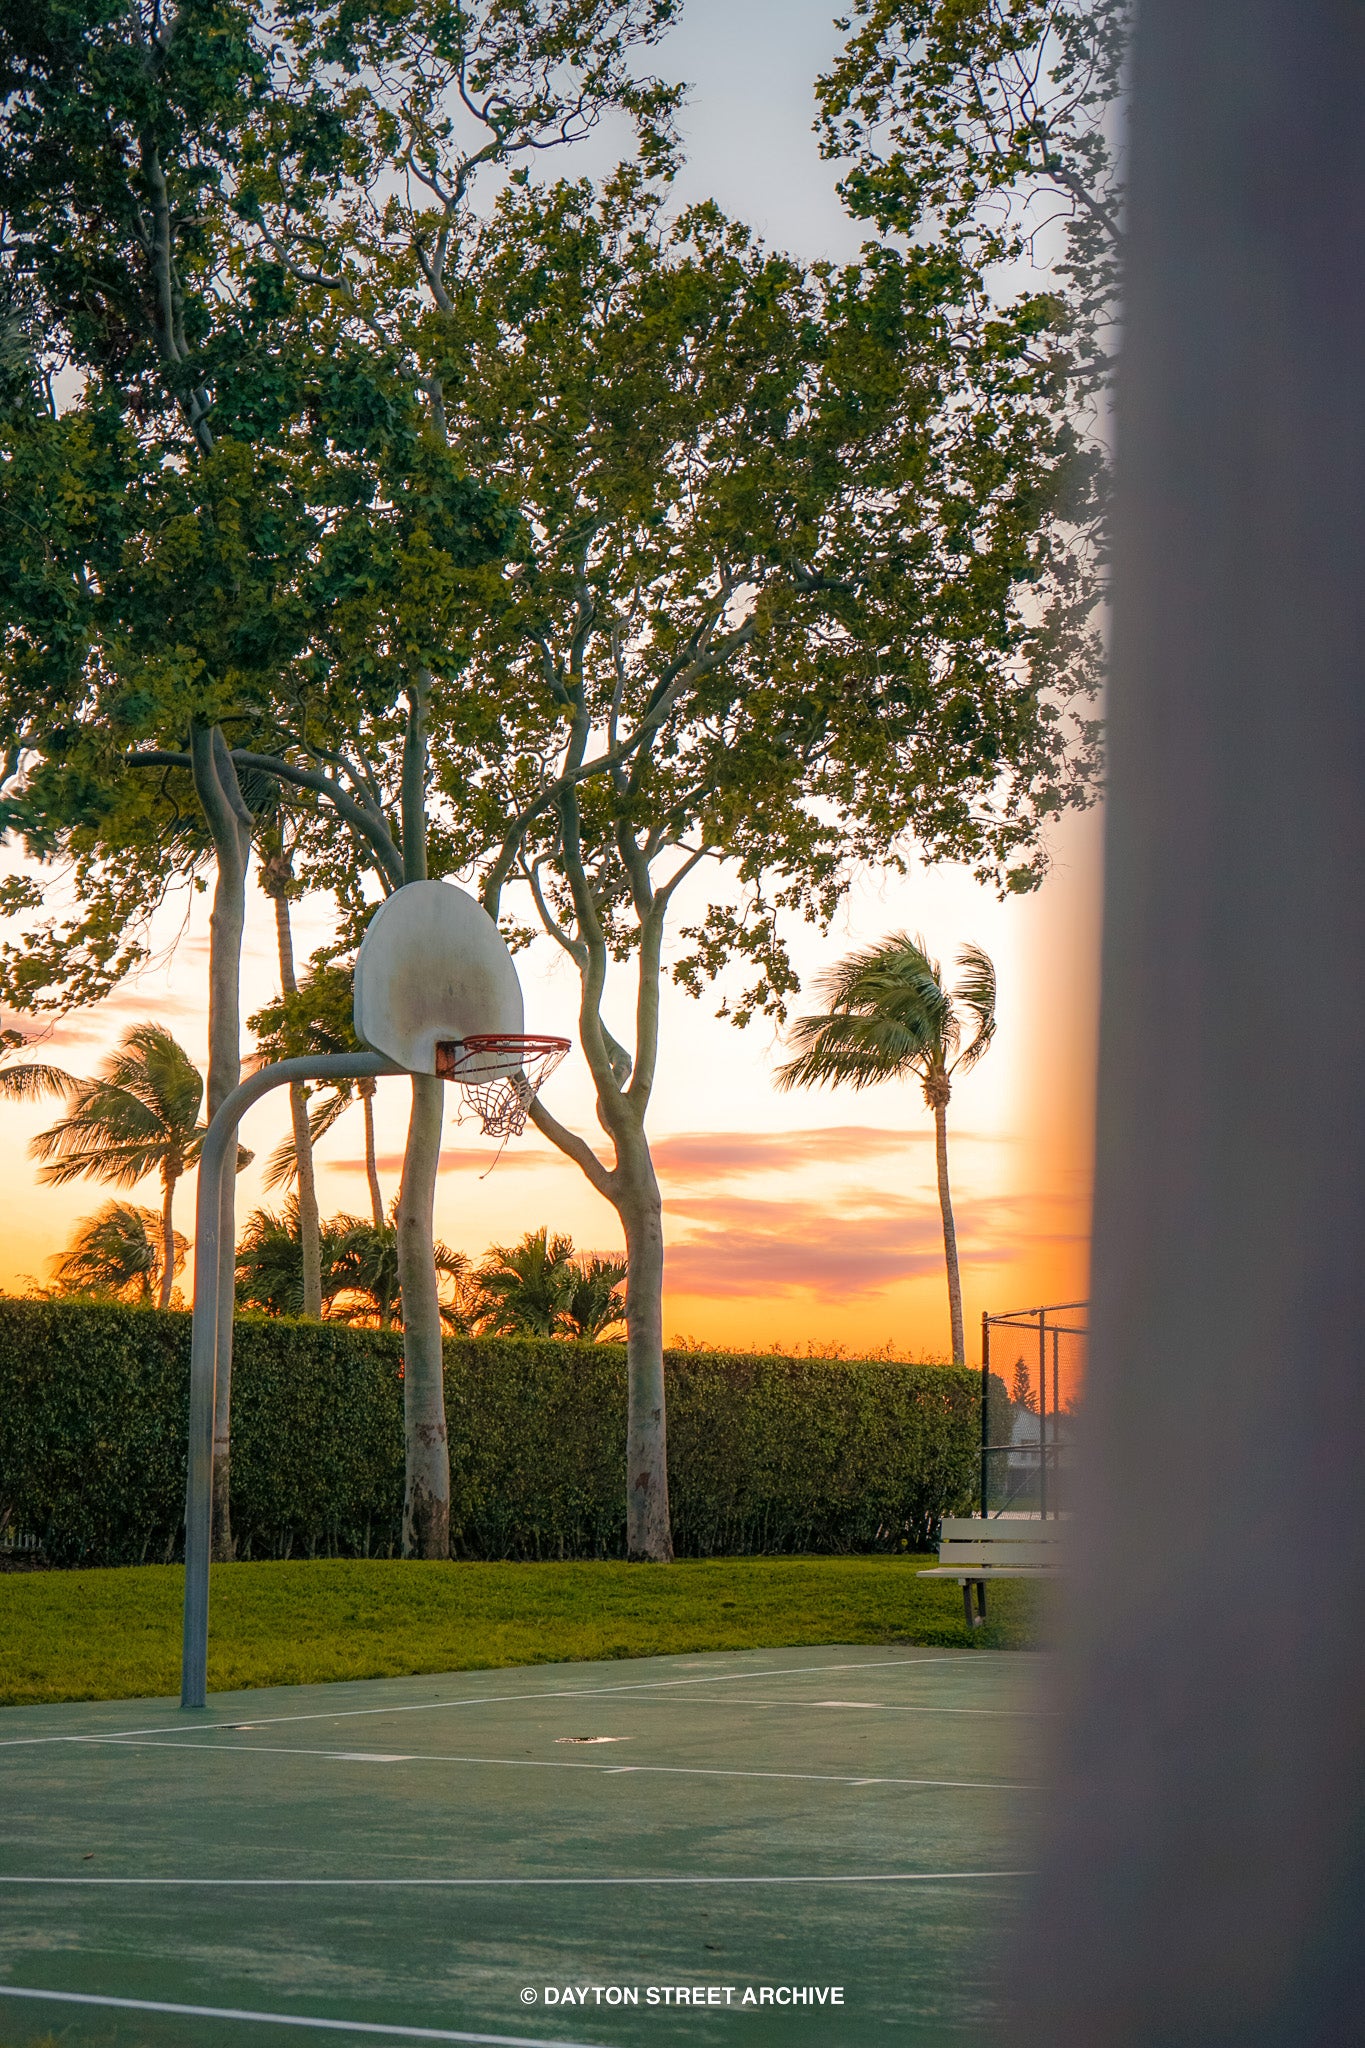 beautiful basketball court with palm trees, sunset